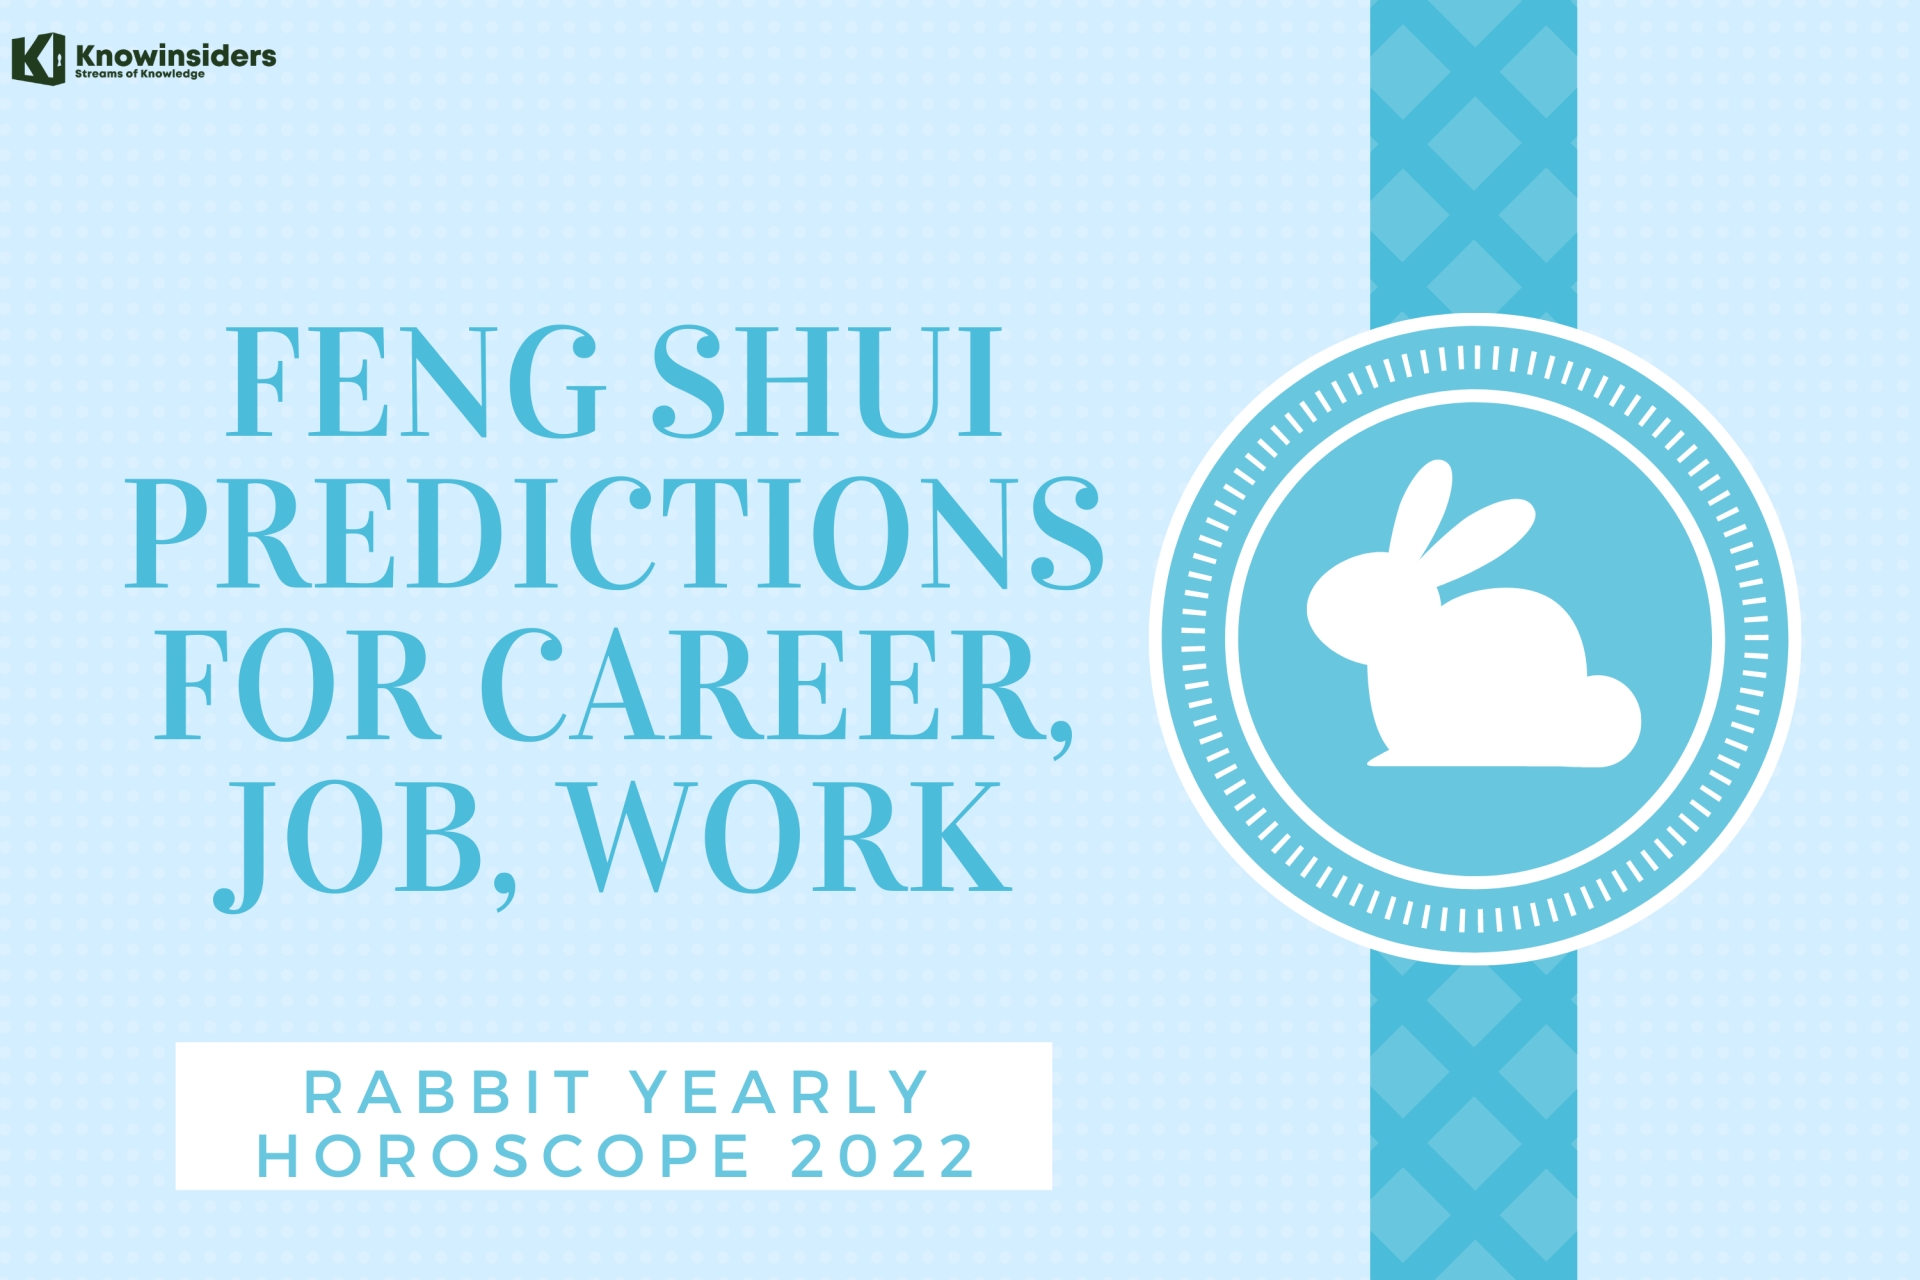 Rabbit Yearly Horoscope 2022 – Feng Shui Predictions for Career, Job and Work